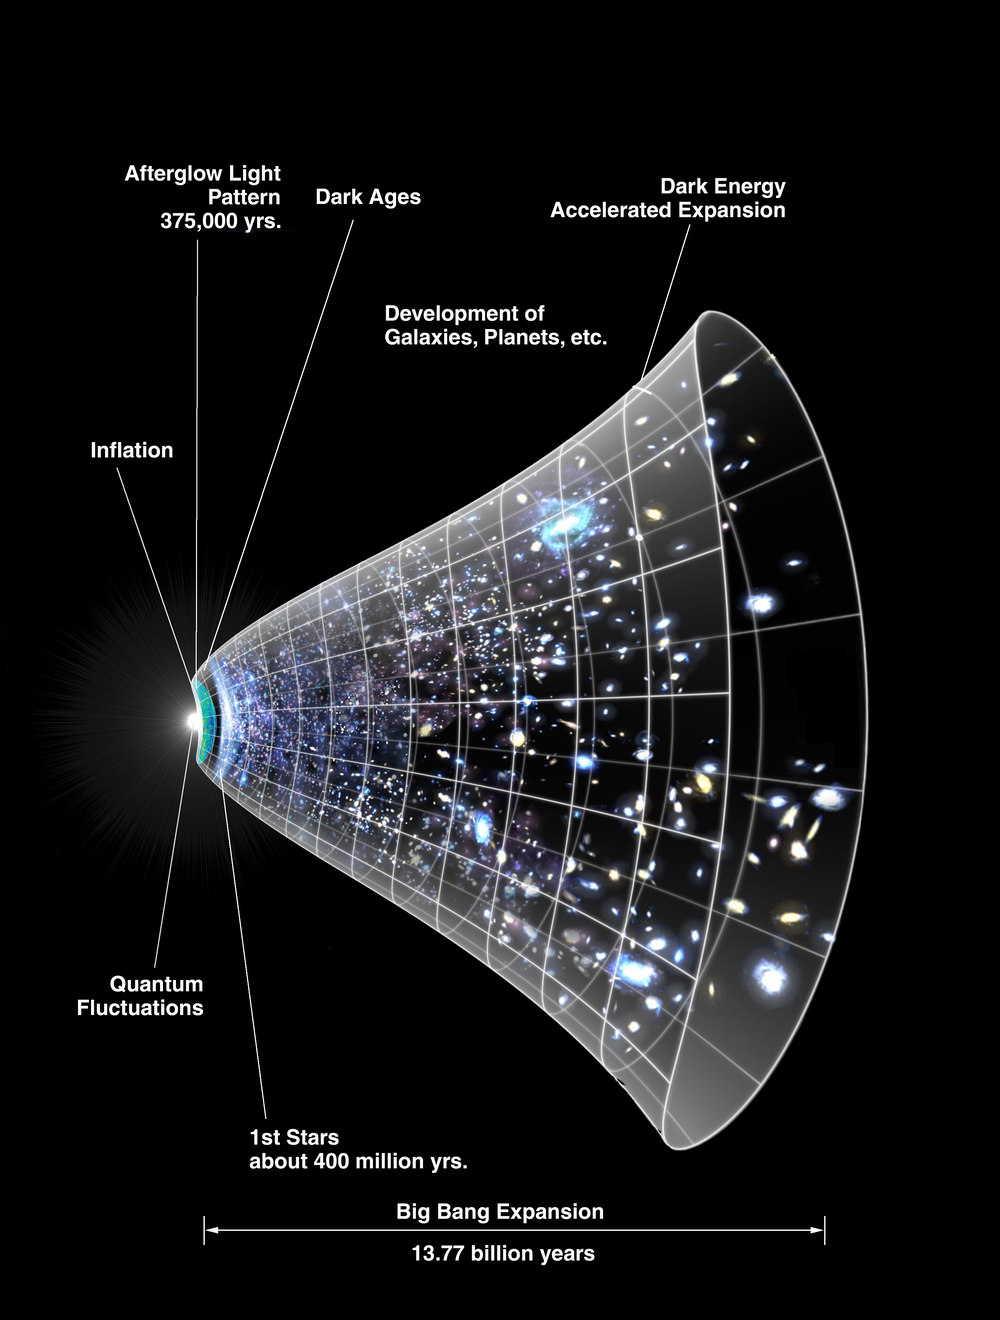 The universe's expansion over time.